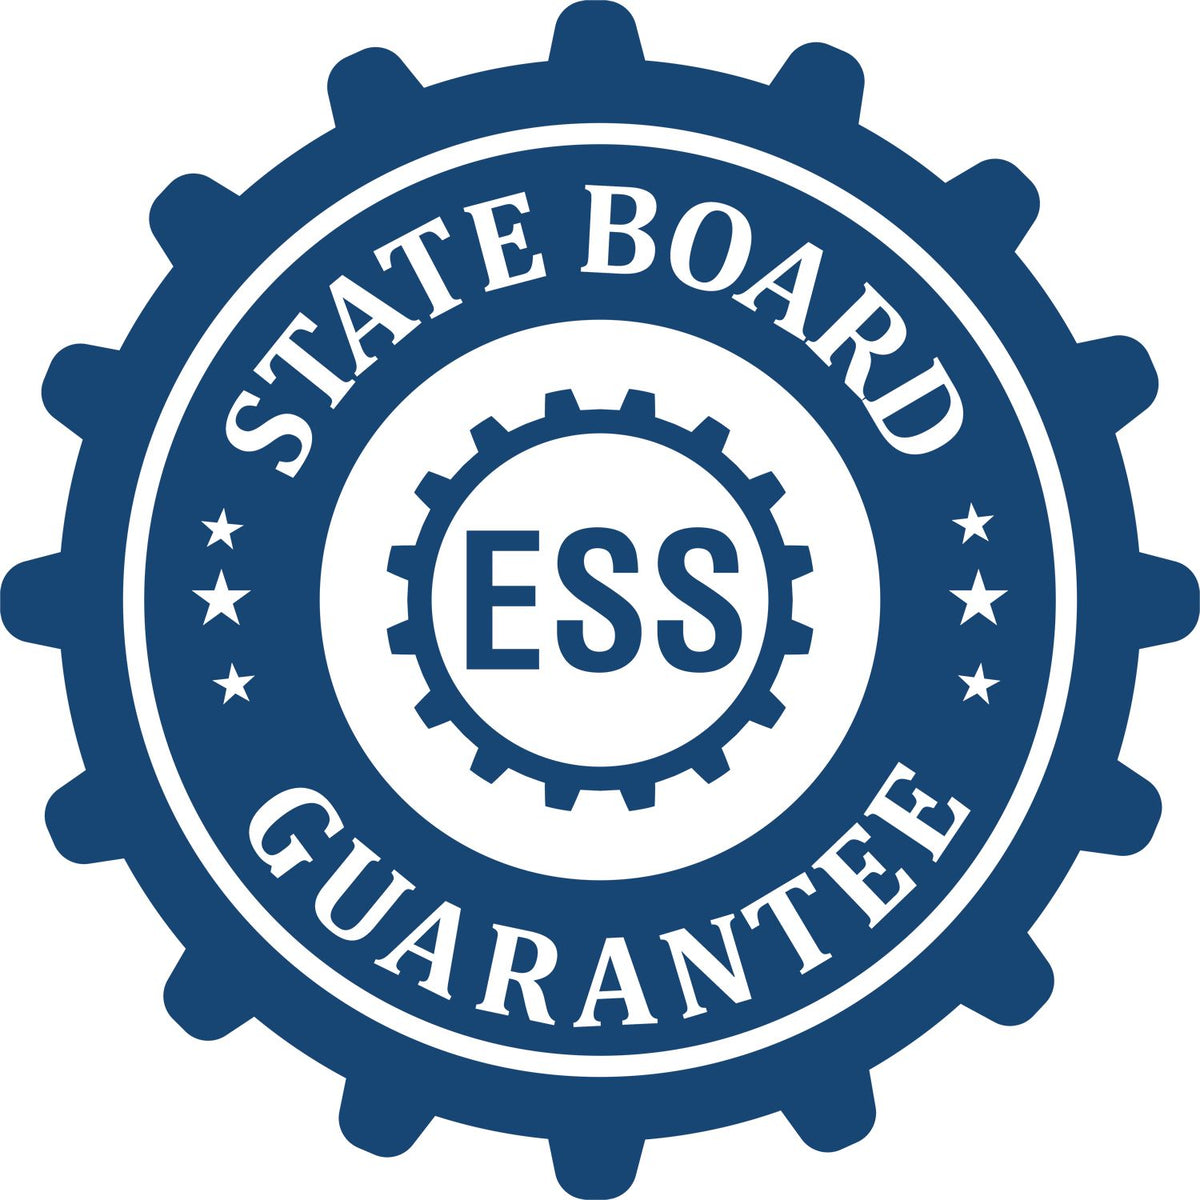 An emblem in a gear shape illustrating a state board guarantee for the Heavy-Duty Guam Rectangular Notary Stamp product.